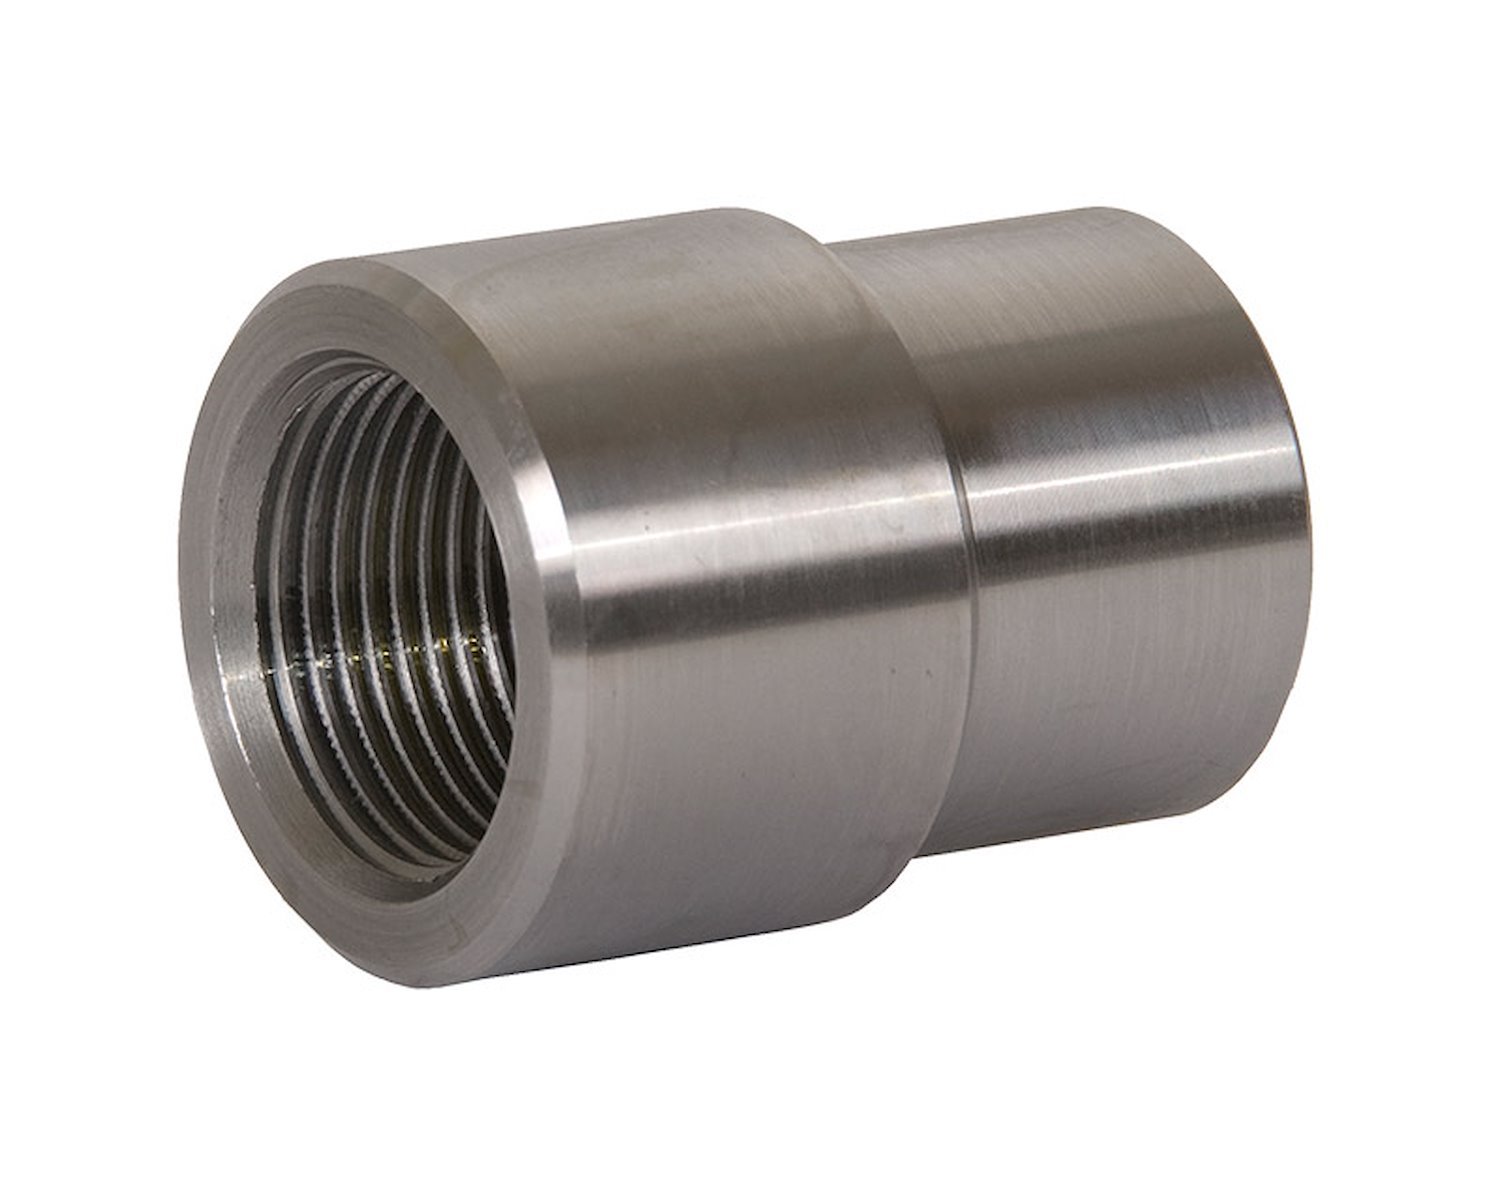 Threaded Tube Adapter Bung For use with 1" inside diameter tubing